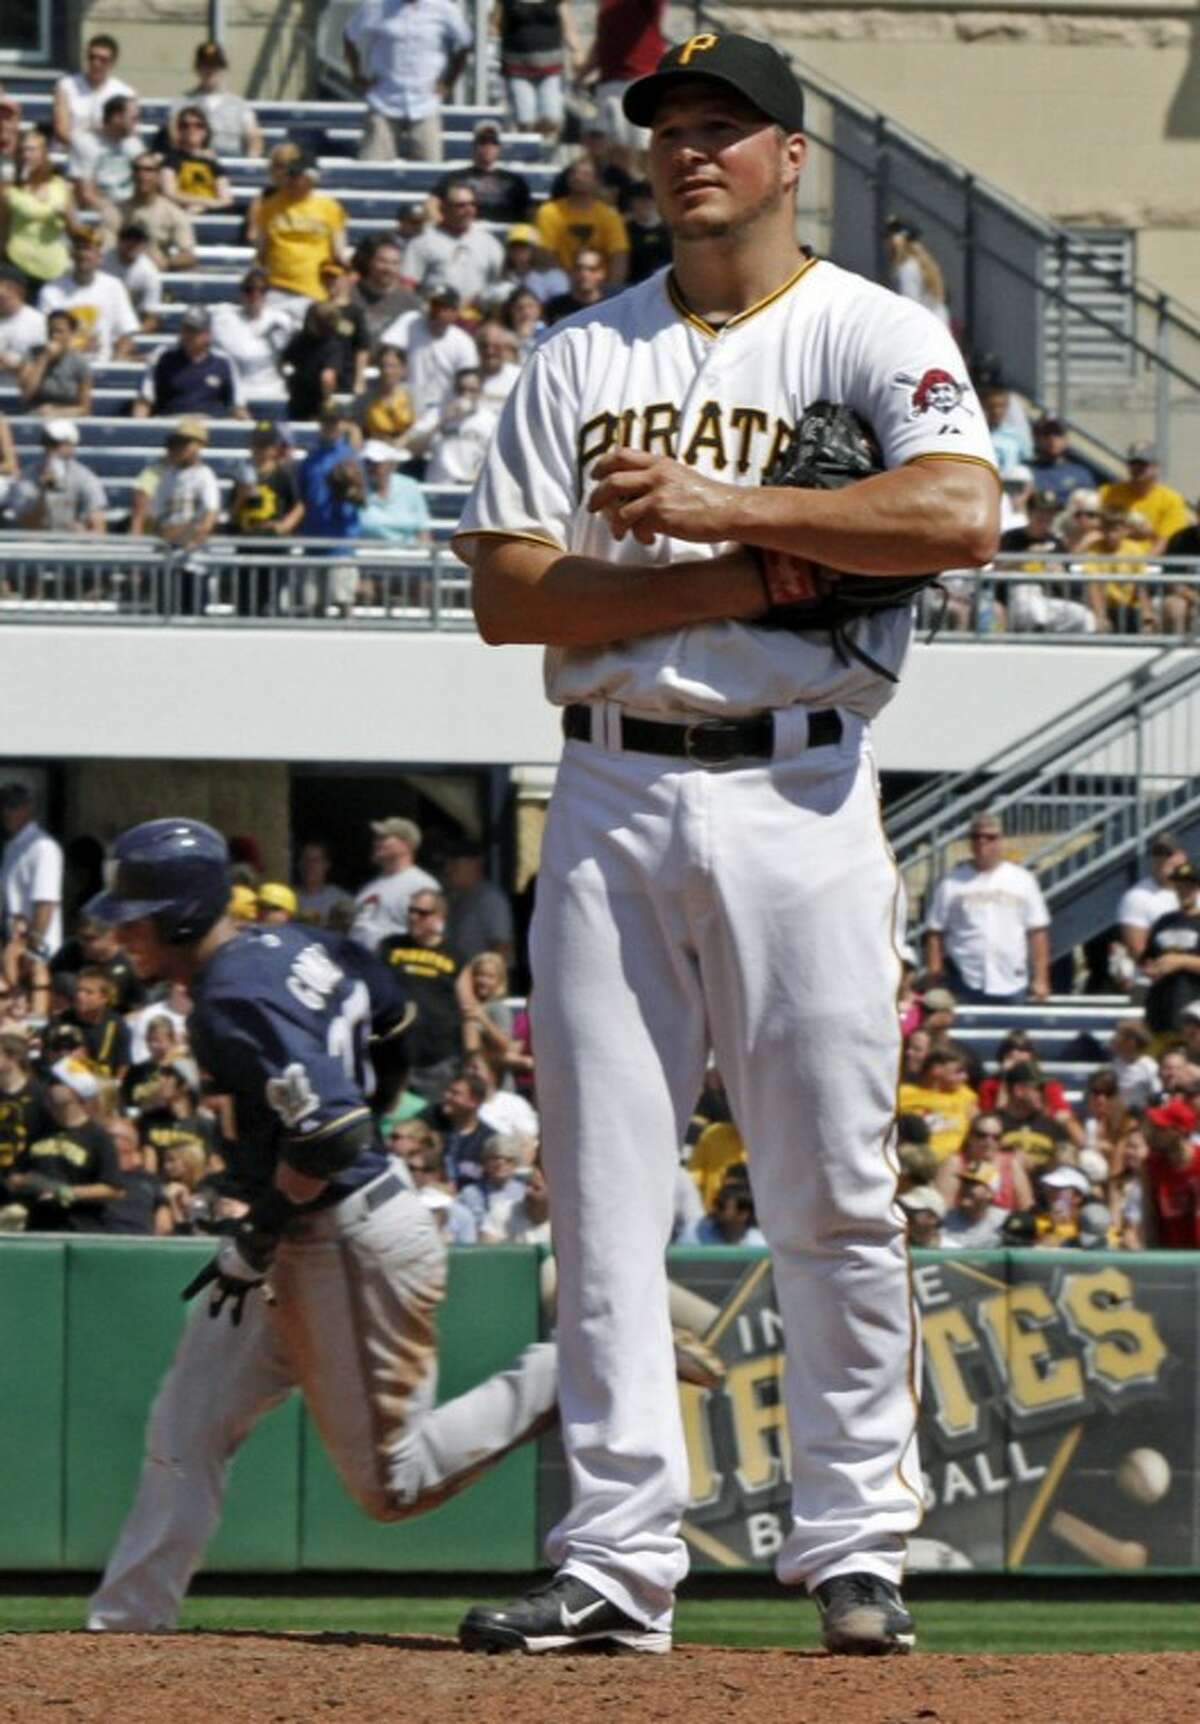 Pittsburgh Pirates starting pitcher Erik Bedard, right, stands on the mound as Milwaukee Brewers' Carlos Gomez rounds the bases behind him after hitting a three-run home run in the fourth inning of a baseball game, Sunday, Aug. 26, 2012, in Pittsburgh. (AP Photo/Keith Srakocic)